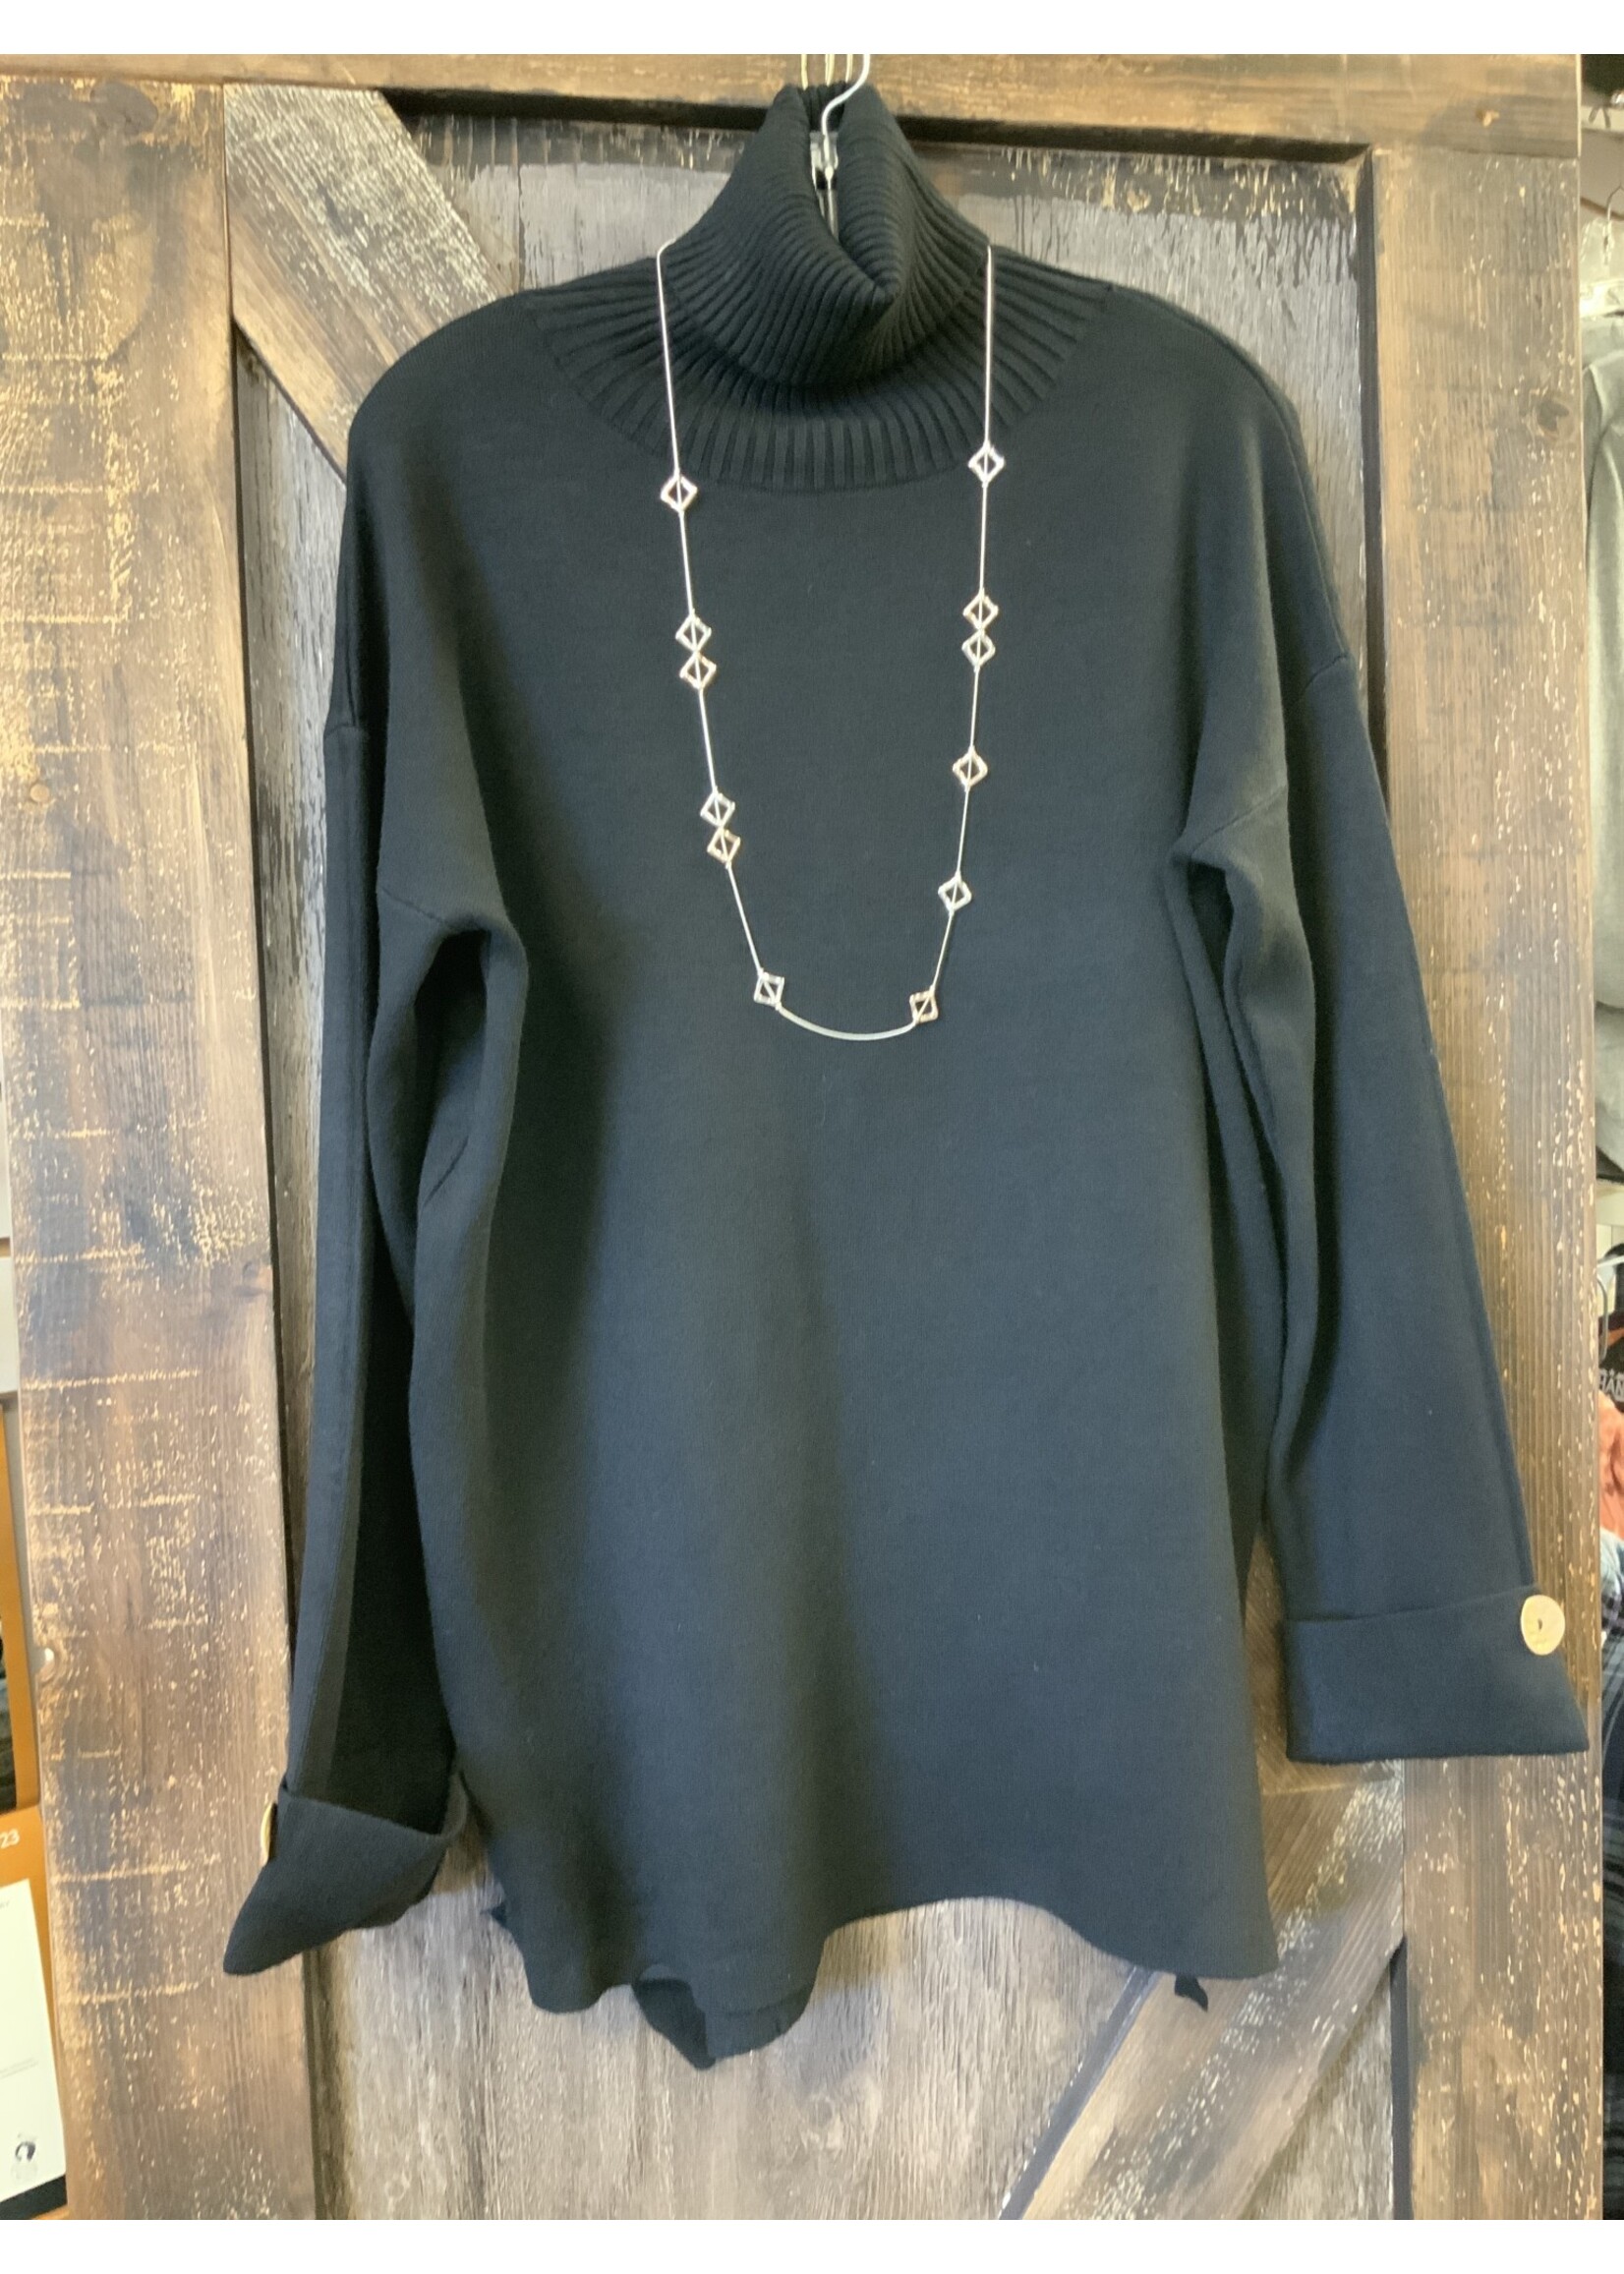 LADIES CASUAL TURTLE NECK LONG SWEATER W/CUFF BUTTON BLACK 65003 S/M